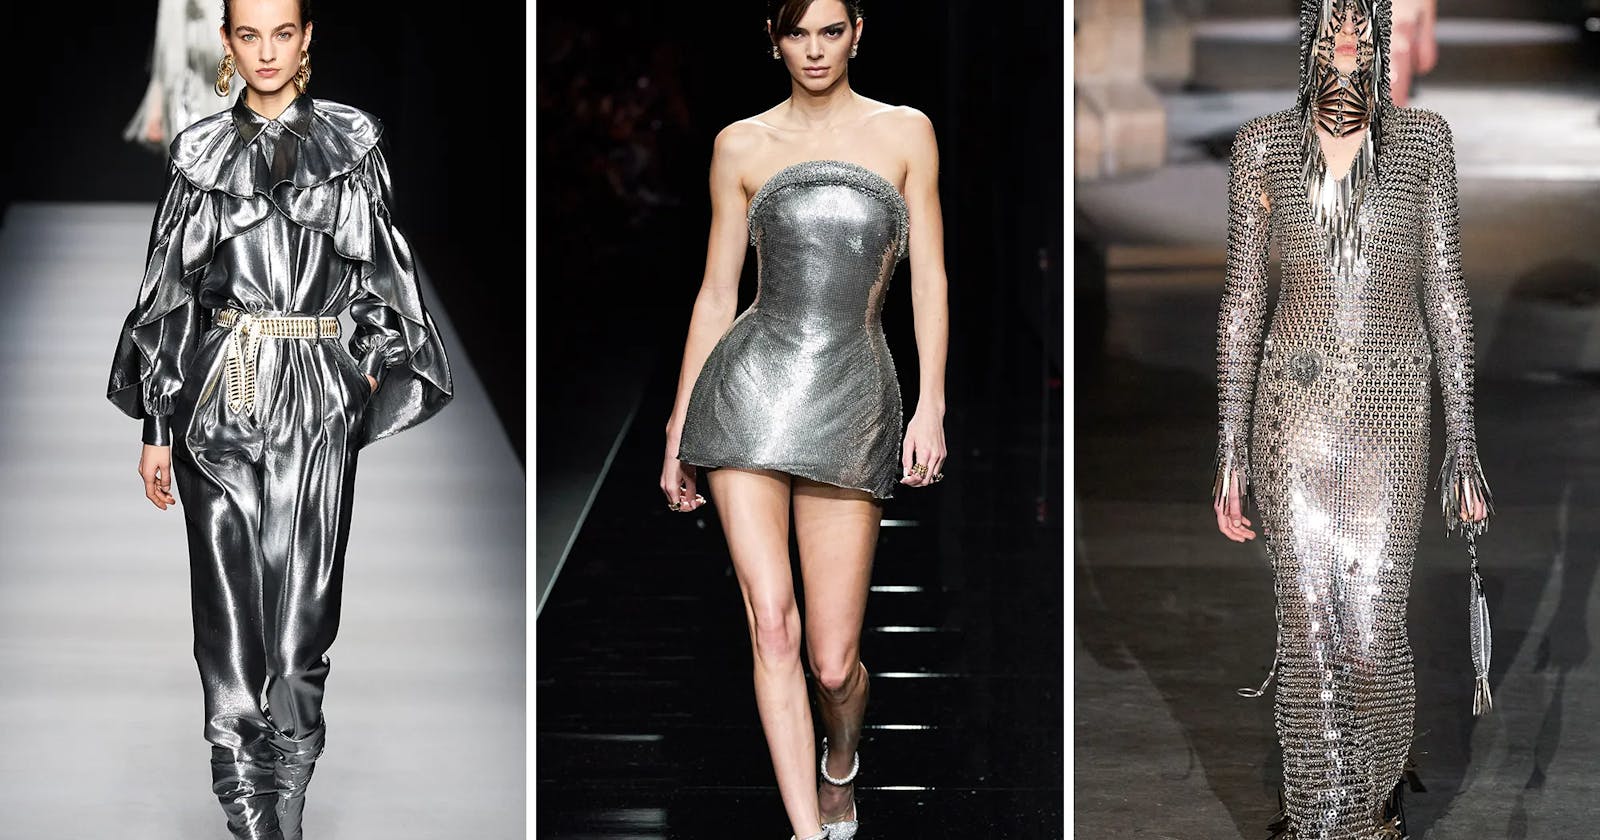 How to Incorporate Metallic Dresses into Your Wardrobe?